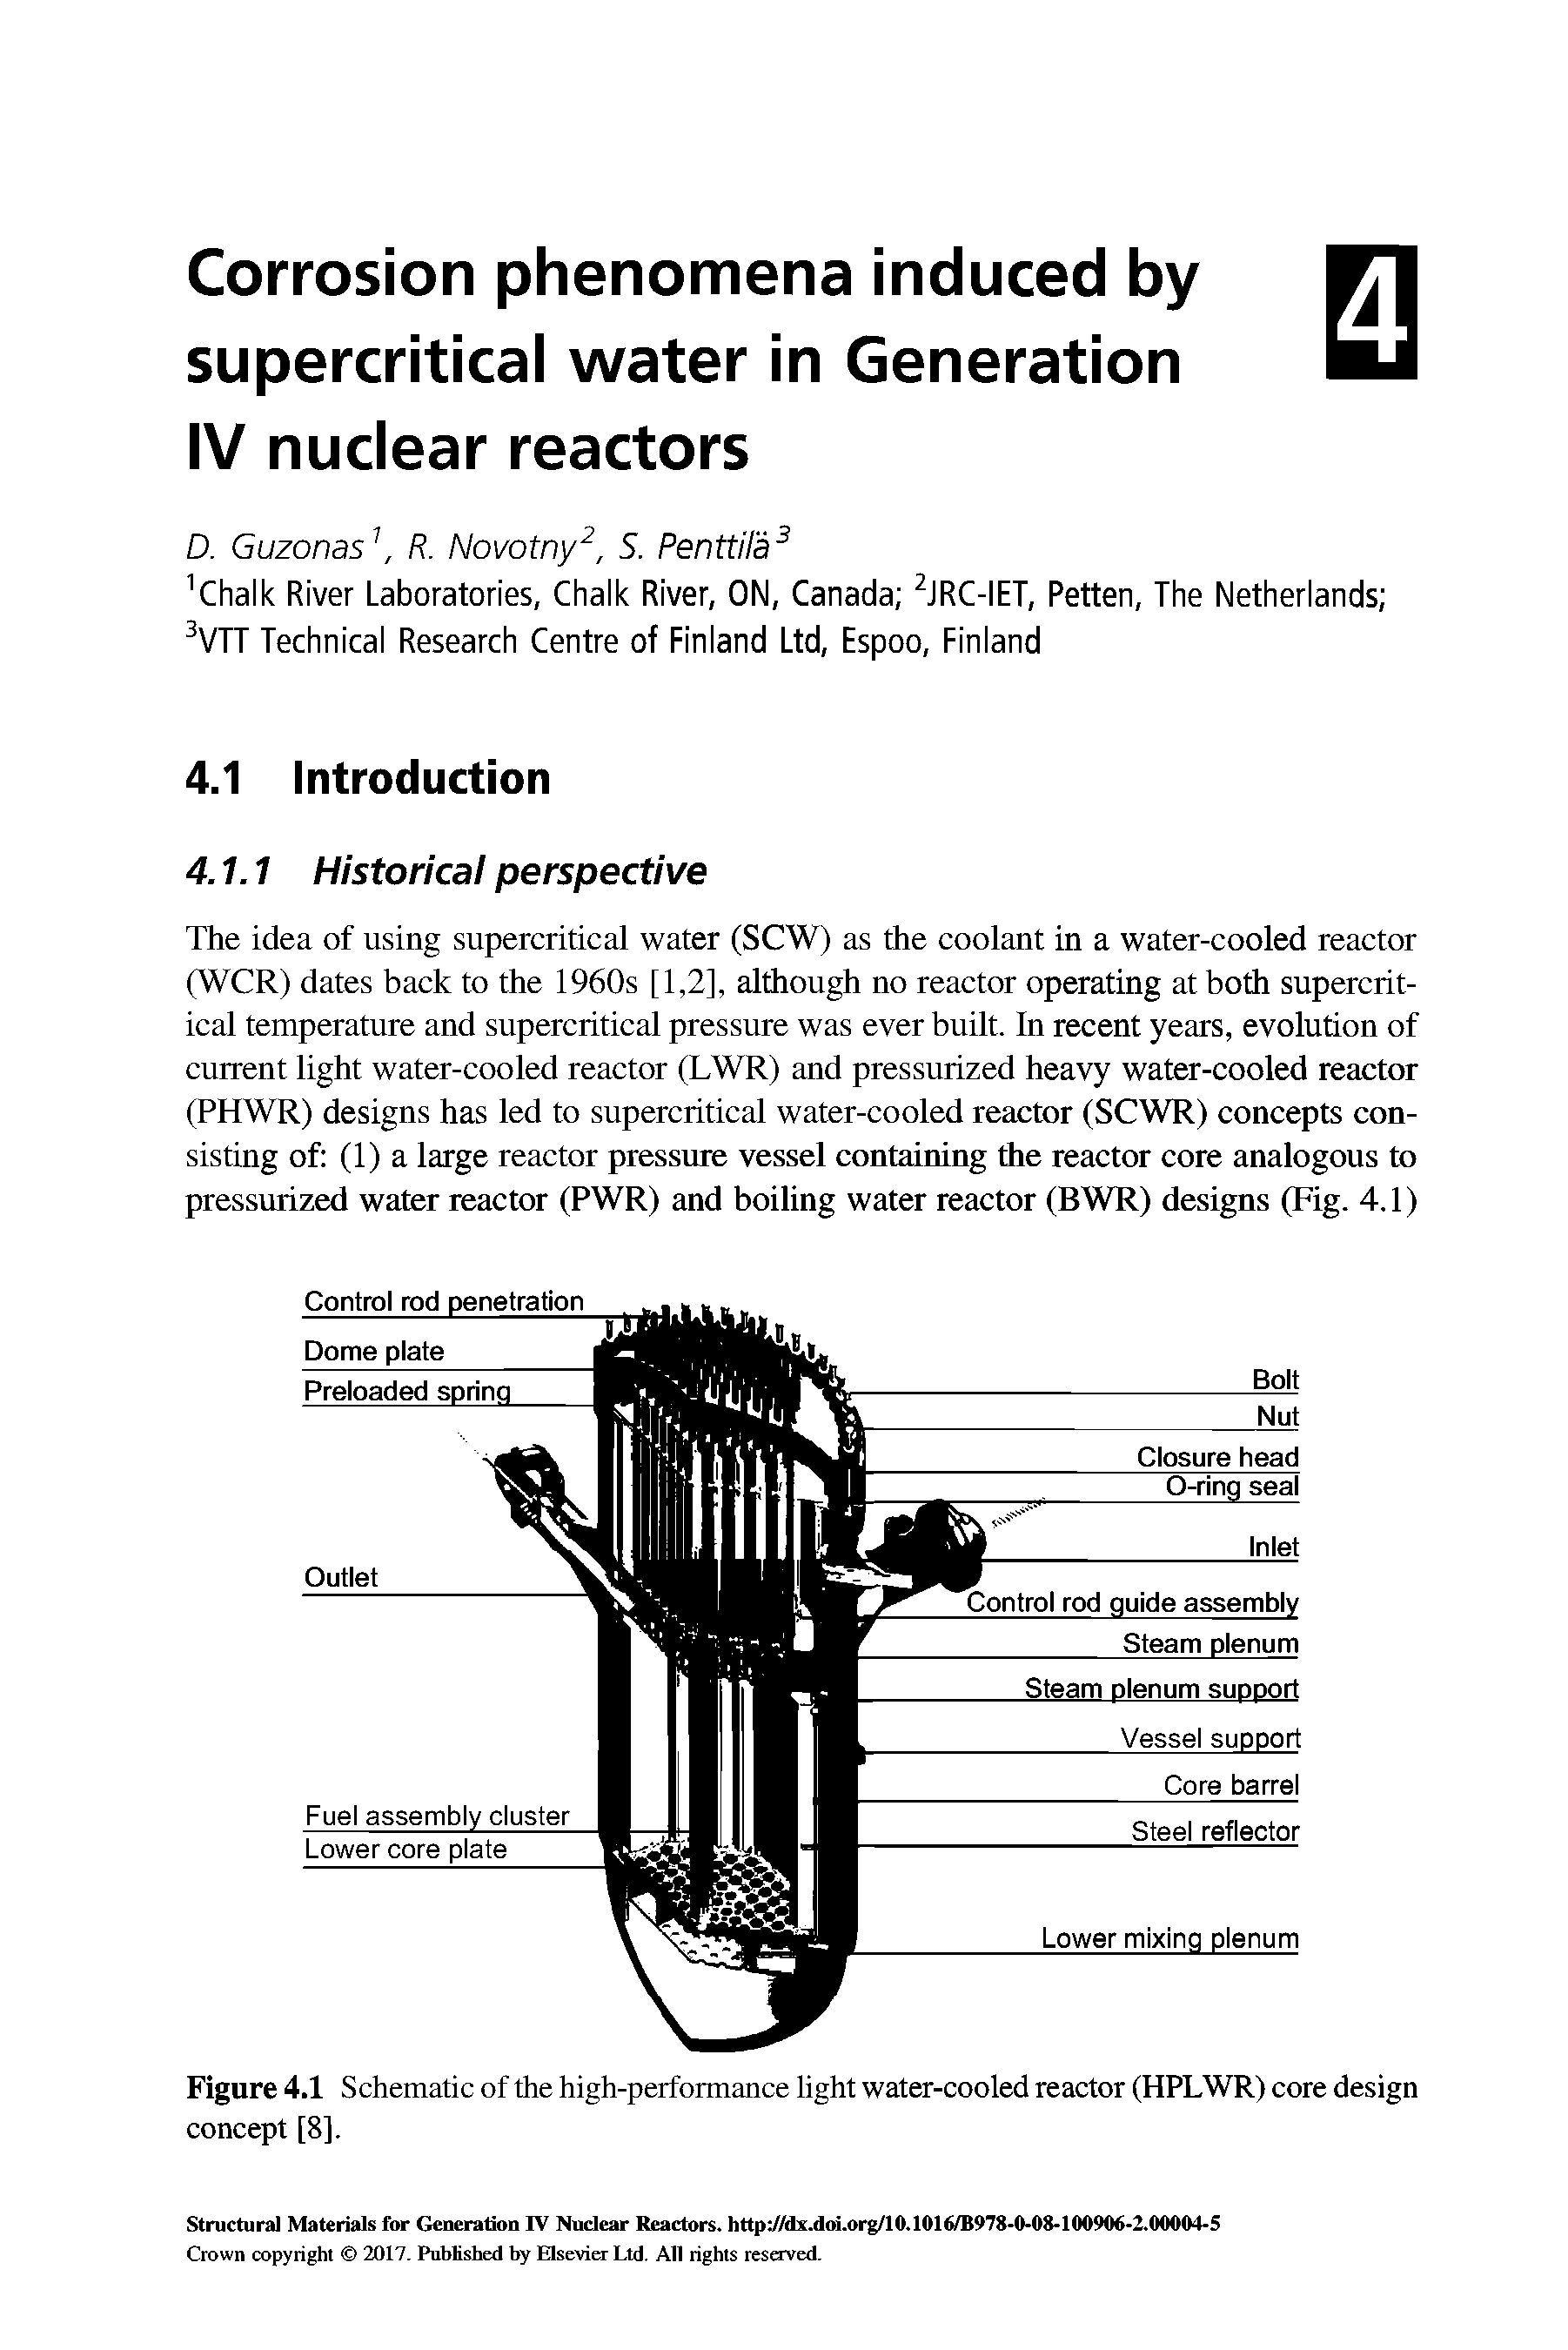 Figure 4.1 Schematic of the high-performance light water-cooled reactor (HPLWR) core design concept [8].